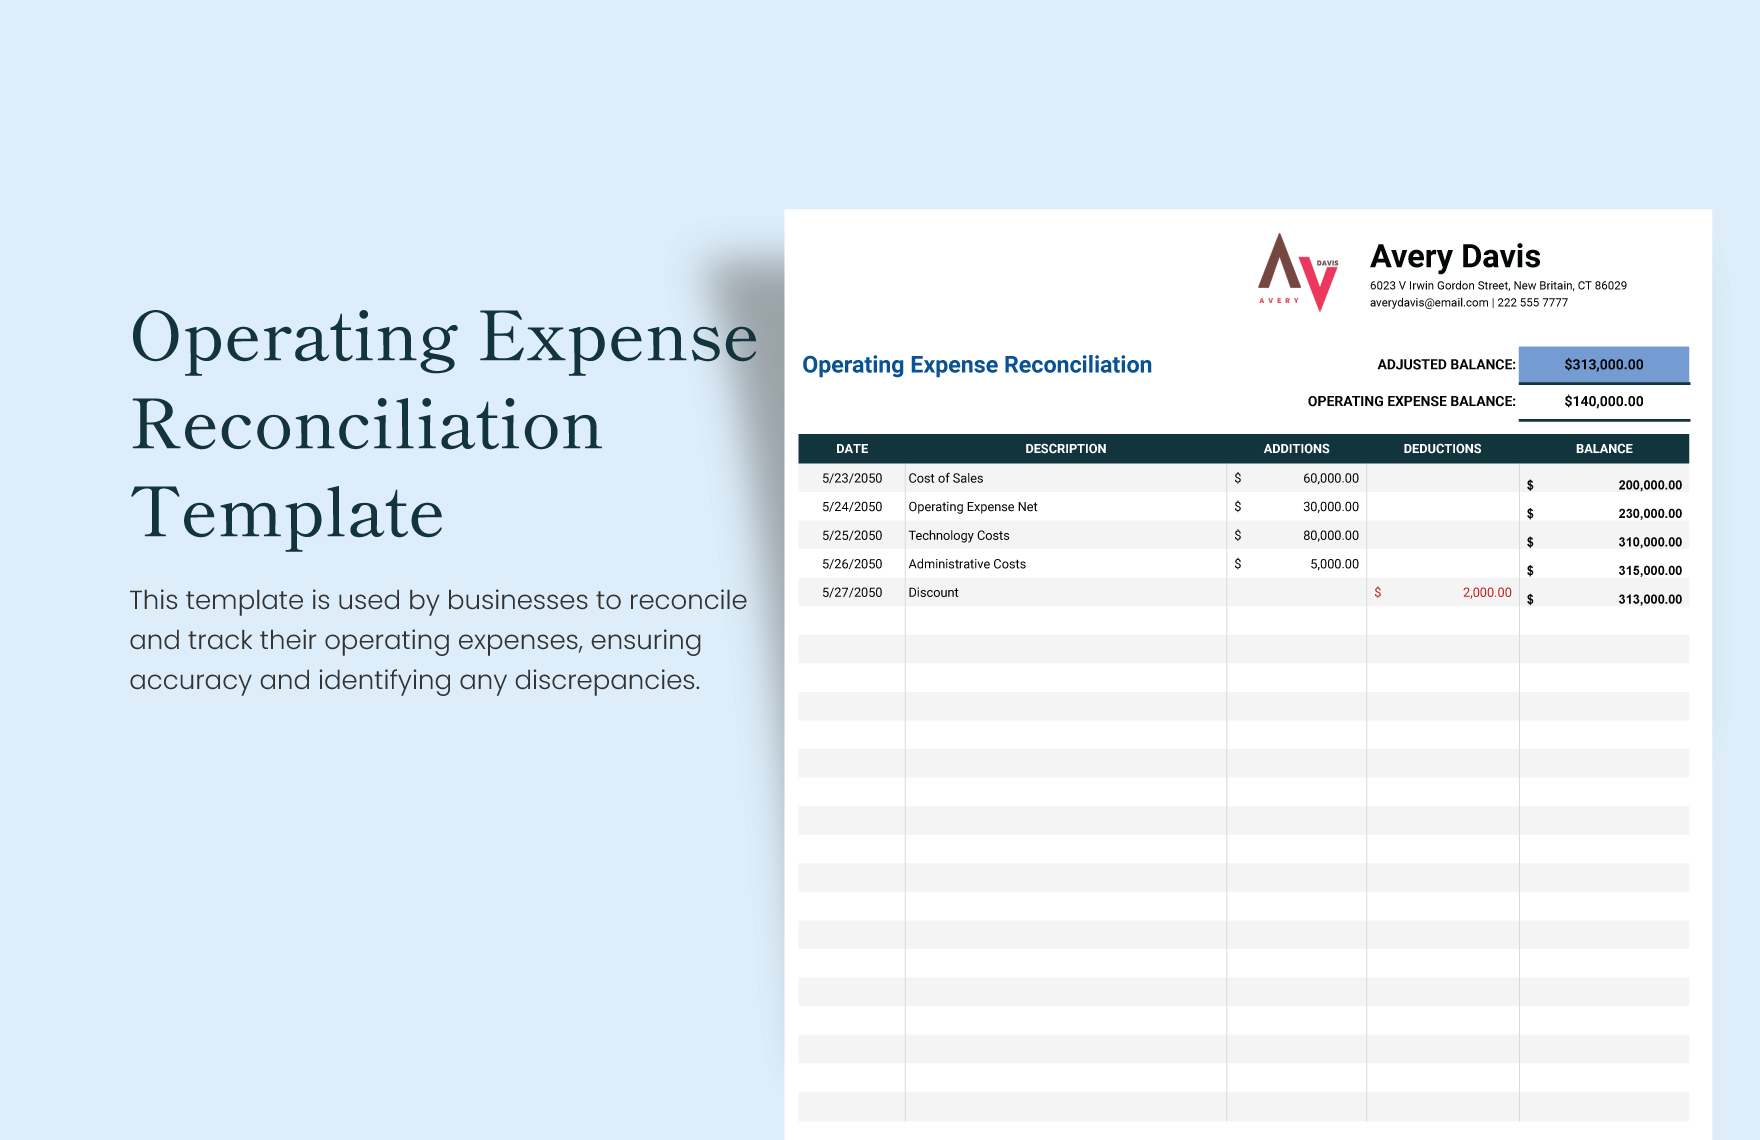 Operating Expense Reconciliation Template